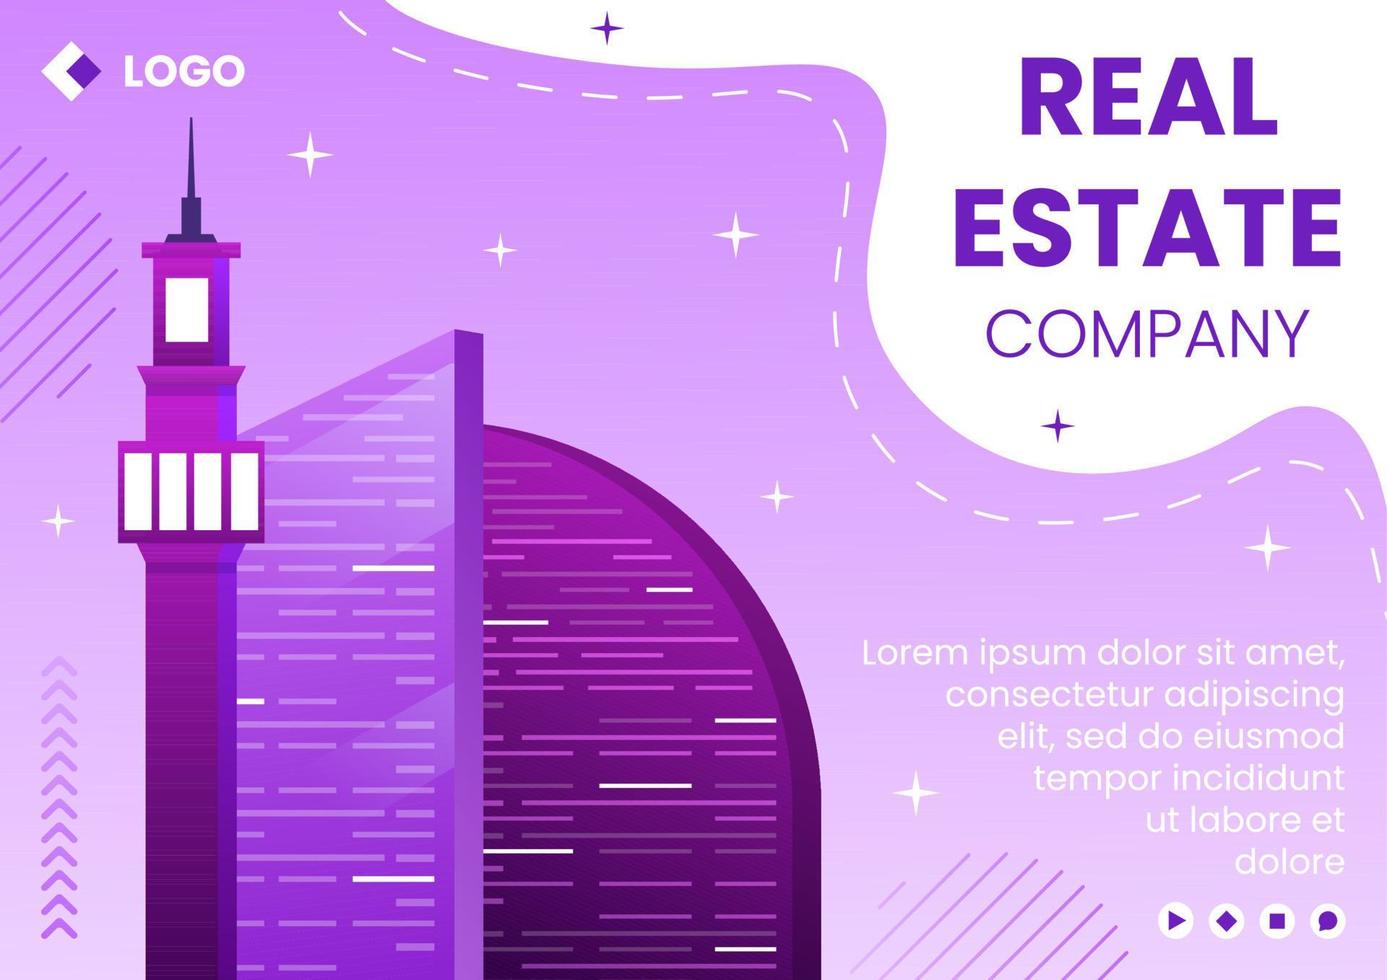 Real Estate Investment Brochure Template Flat Design Illustration Editable of Square Background Suitable for Social media, Greeting Card and Web Internet Ads vector